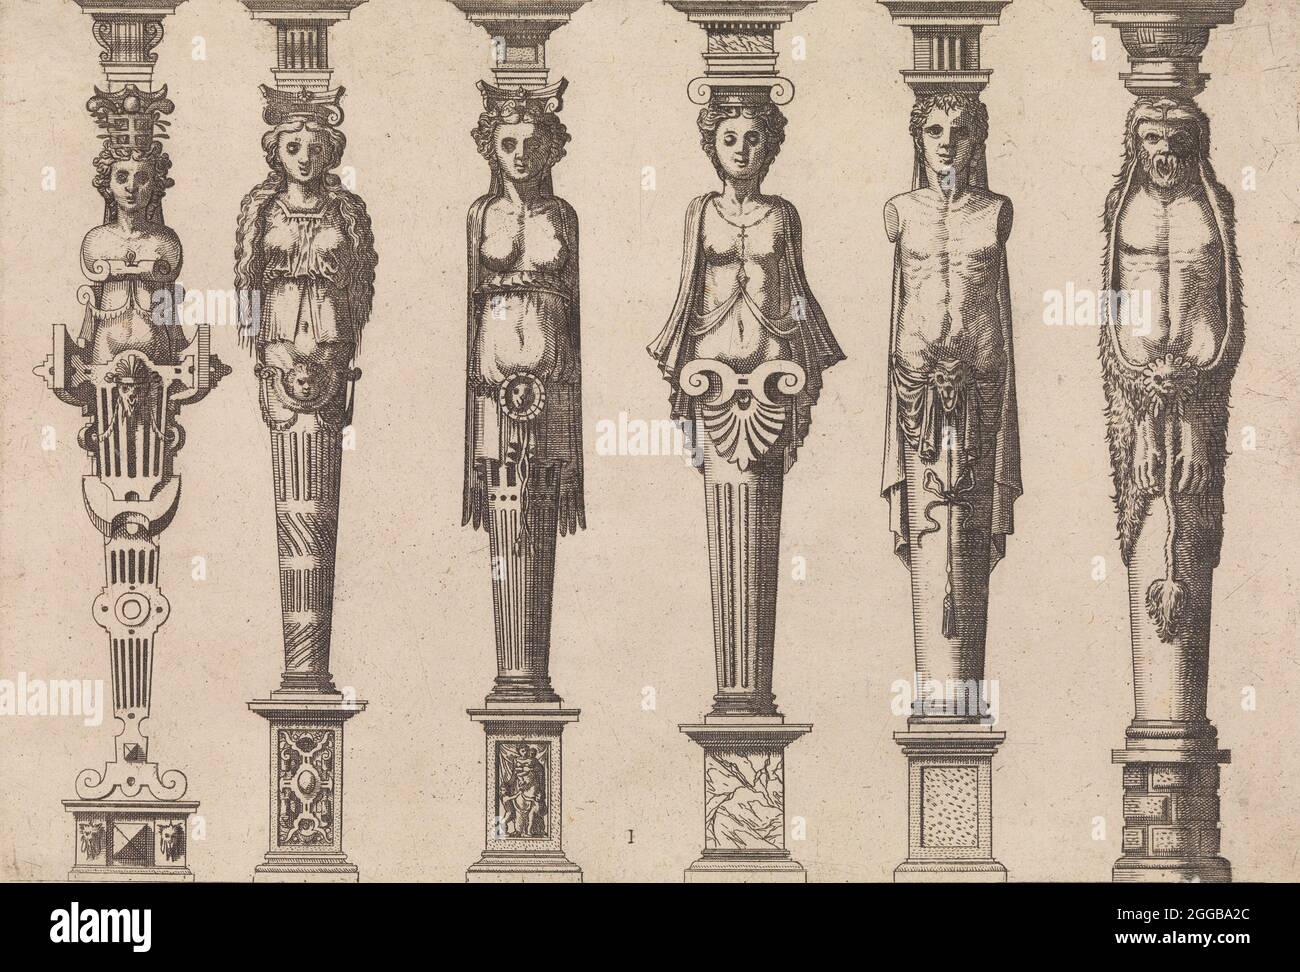 Six herms, four female and two male, with Hercules at far right, ca. 1565. Plate 1, from Caryatidum [...] sive Athlantidum multiformium ad quemlibet Architecture ordinem Accommodatarum centuria prima [...], a work on architectural orders of the 1st century. Stock Photo